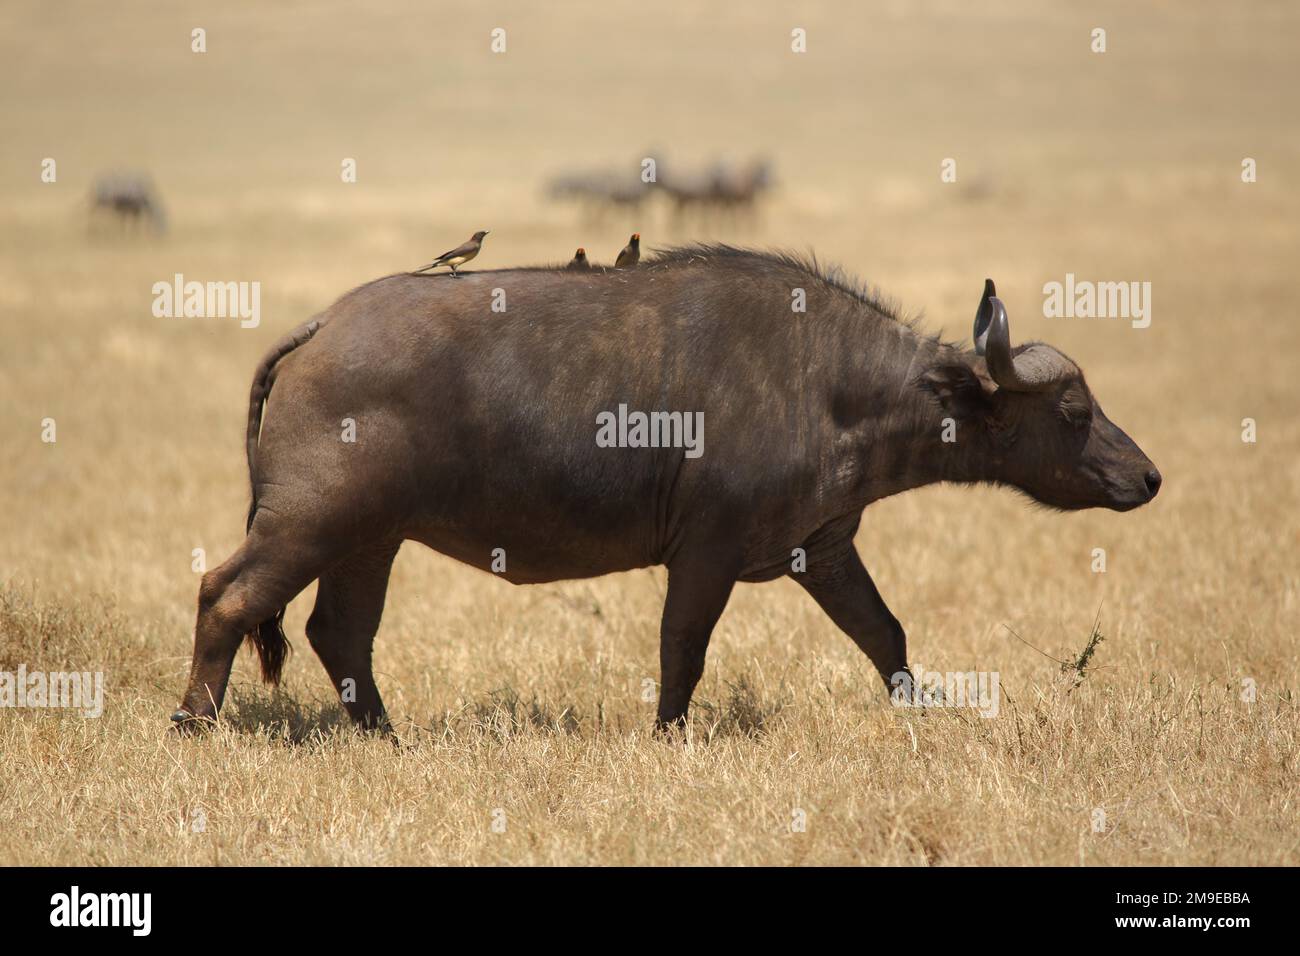 African buffalo (Syncerus caffer caffer) with oxpecker on back in Ngorongoro Crater, Serengeti, Tanzania Stock Photo